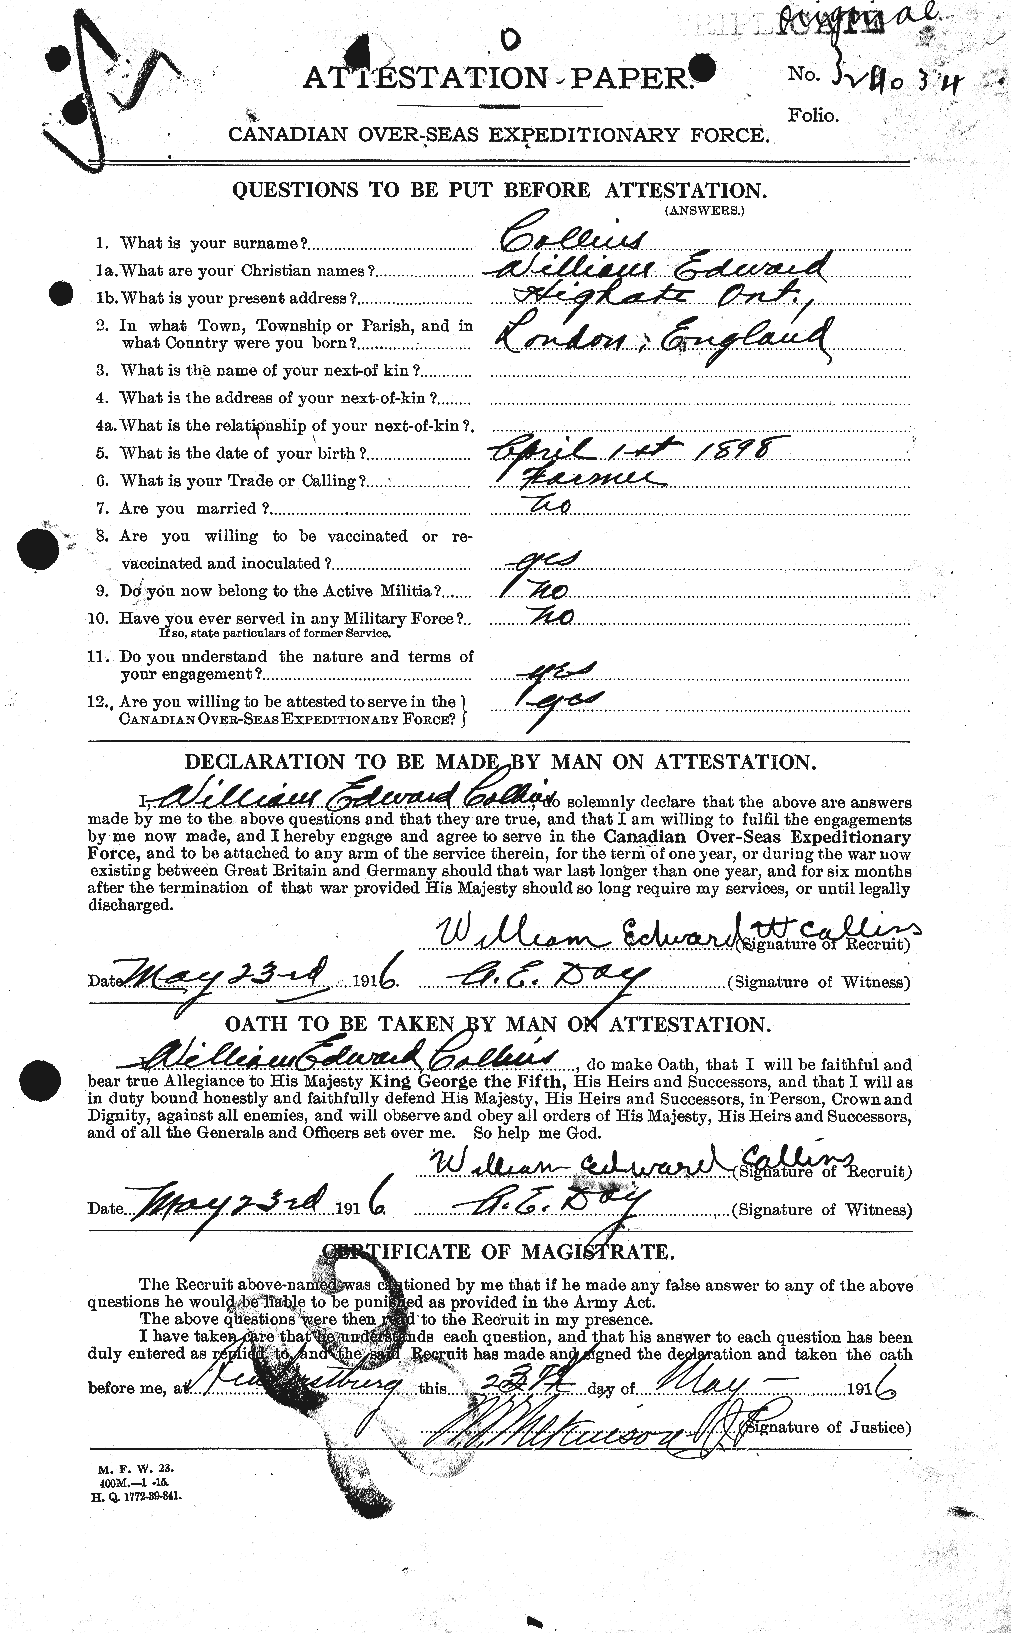 Personnel Records of the First World War - CEF 068801a